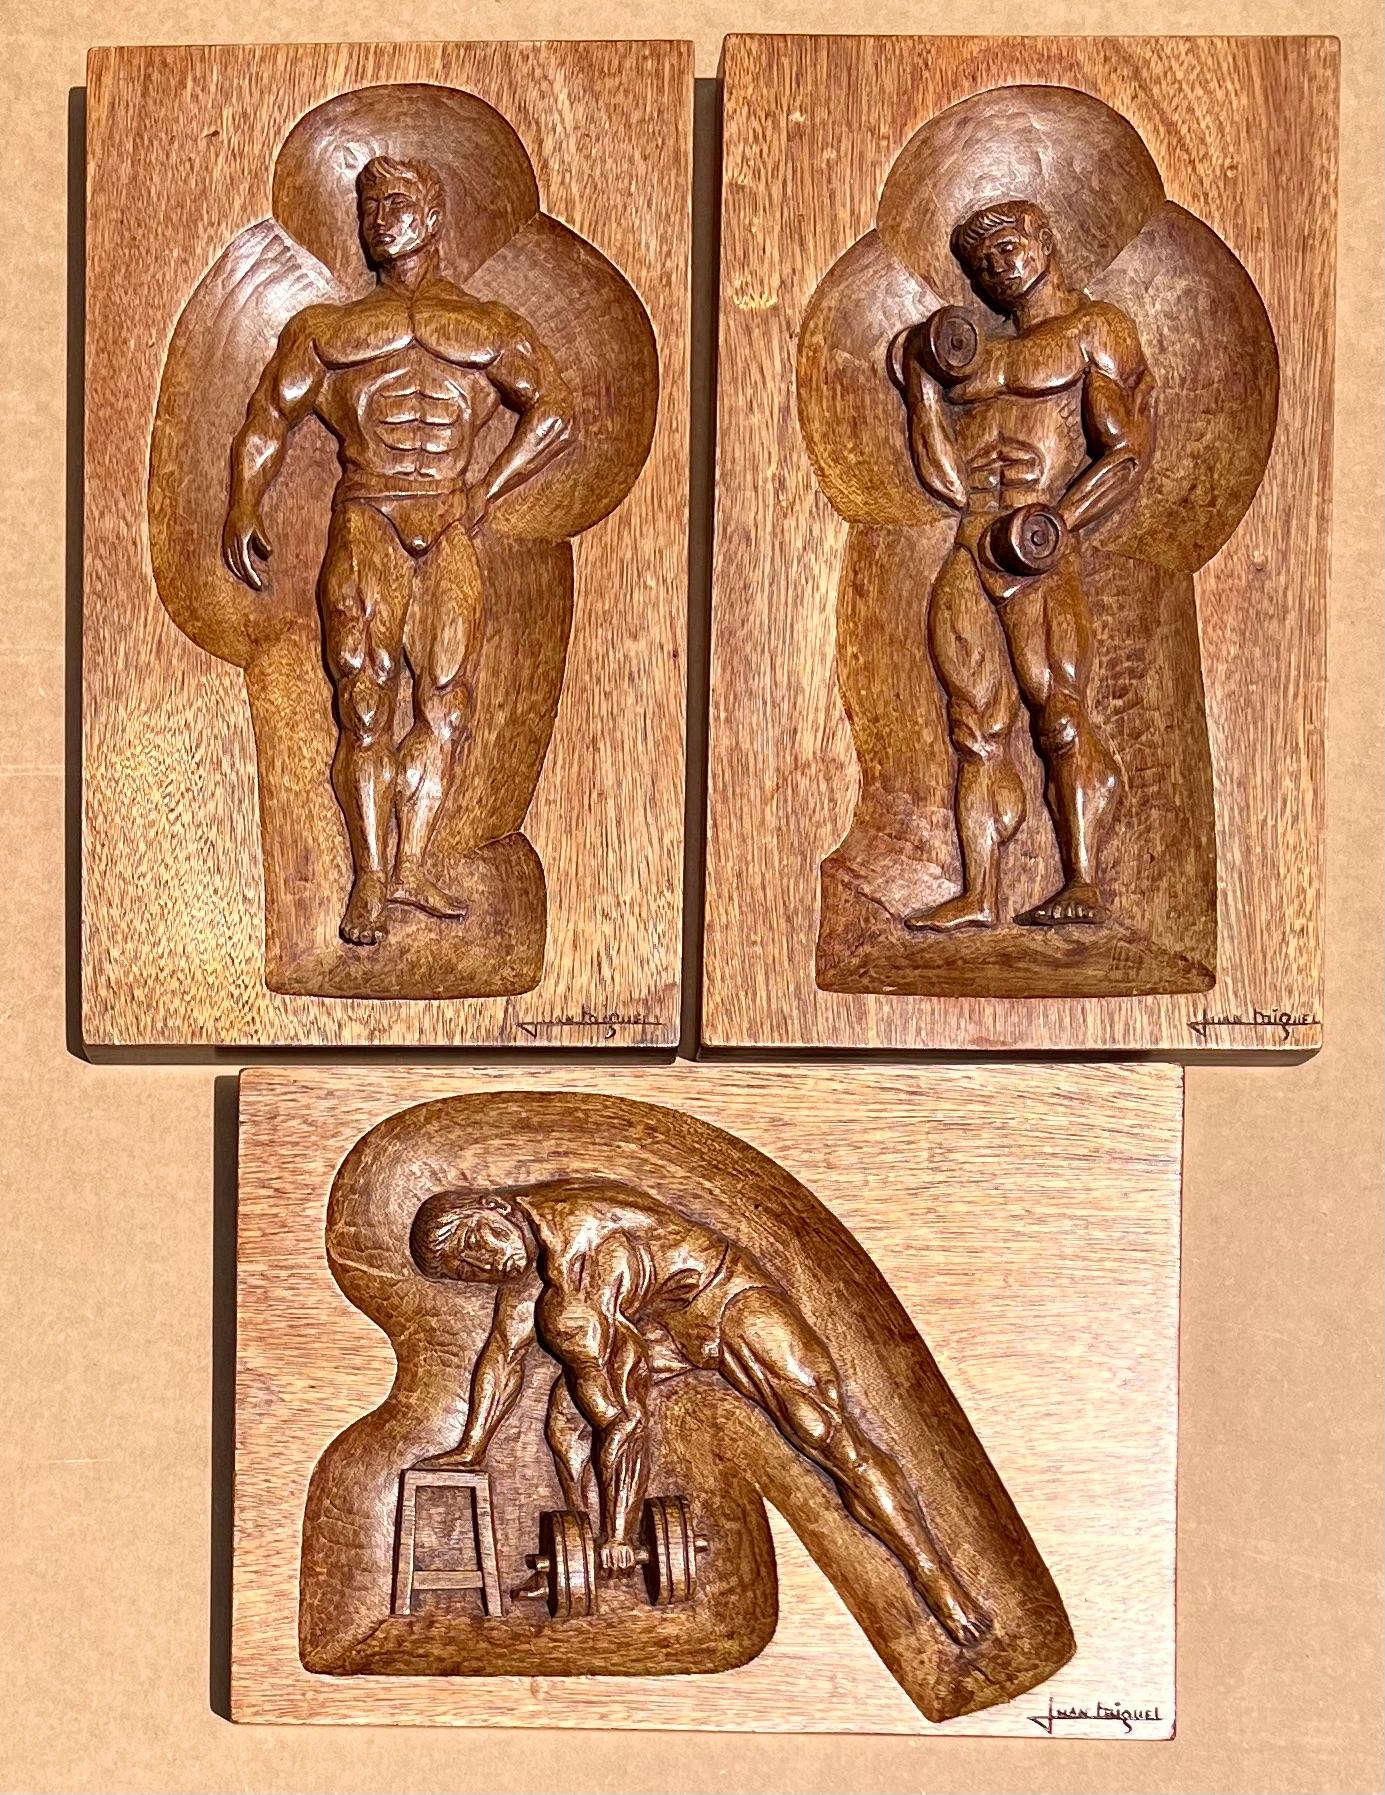 3 Carved Wood Plaques Outsider Modern Mid 20th Century Latin Gay Male LGBT Beefcake

Each plaque is 16 x 10 x 1 1/4 inches. Two are vertical and one is horizontal. Each is incised with the signature Juan Miguel on the lower right. We've had the